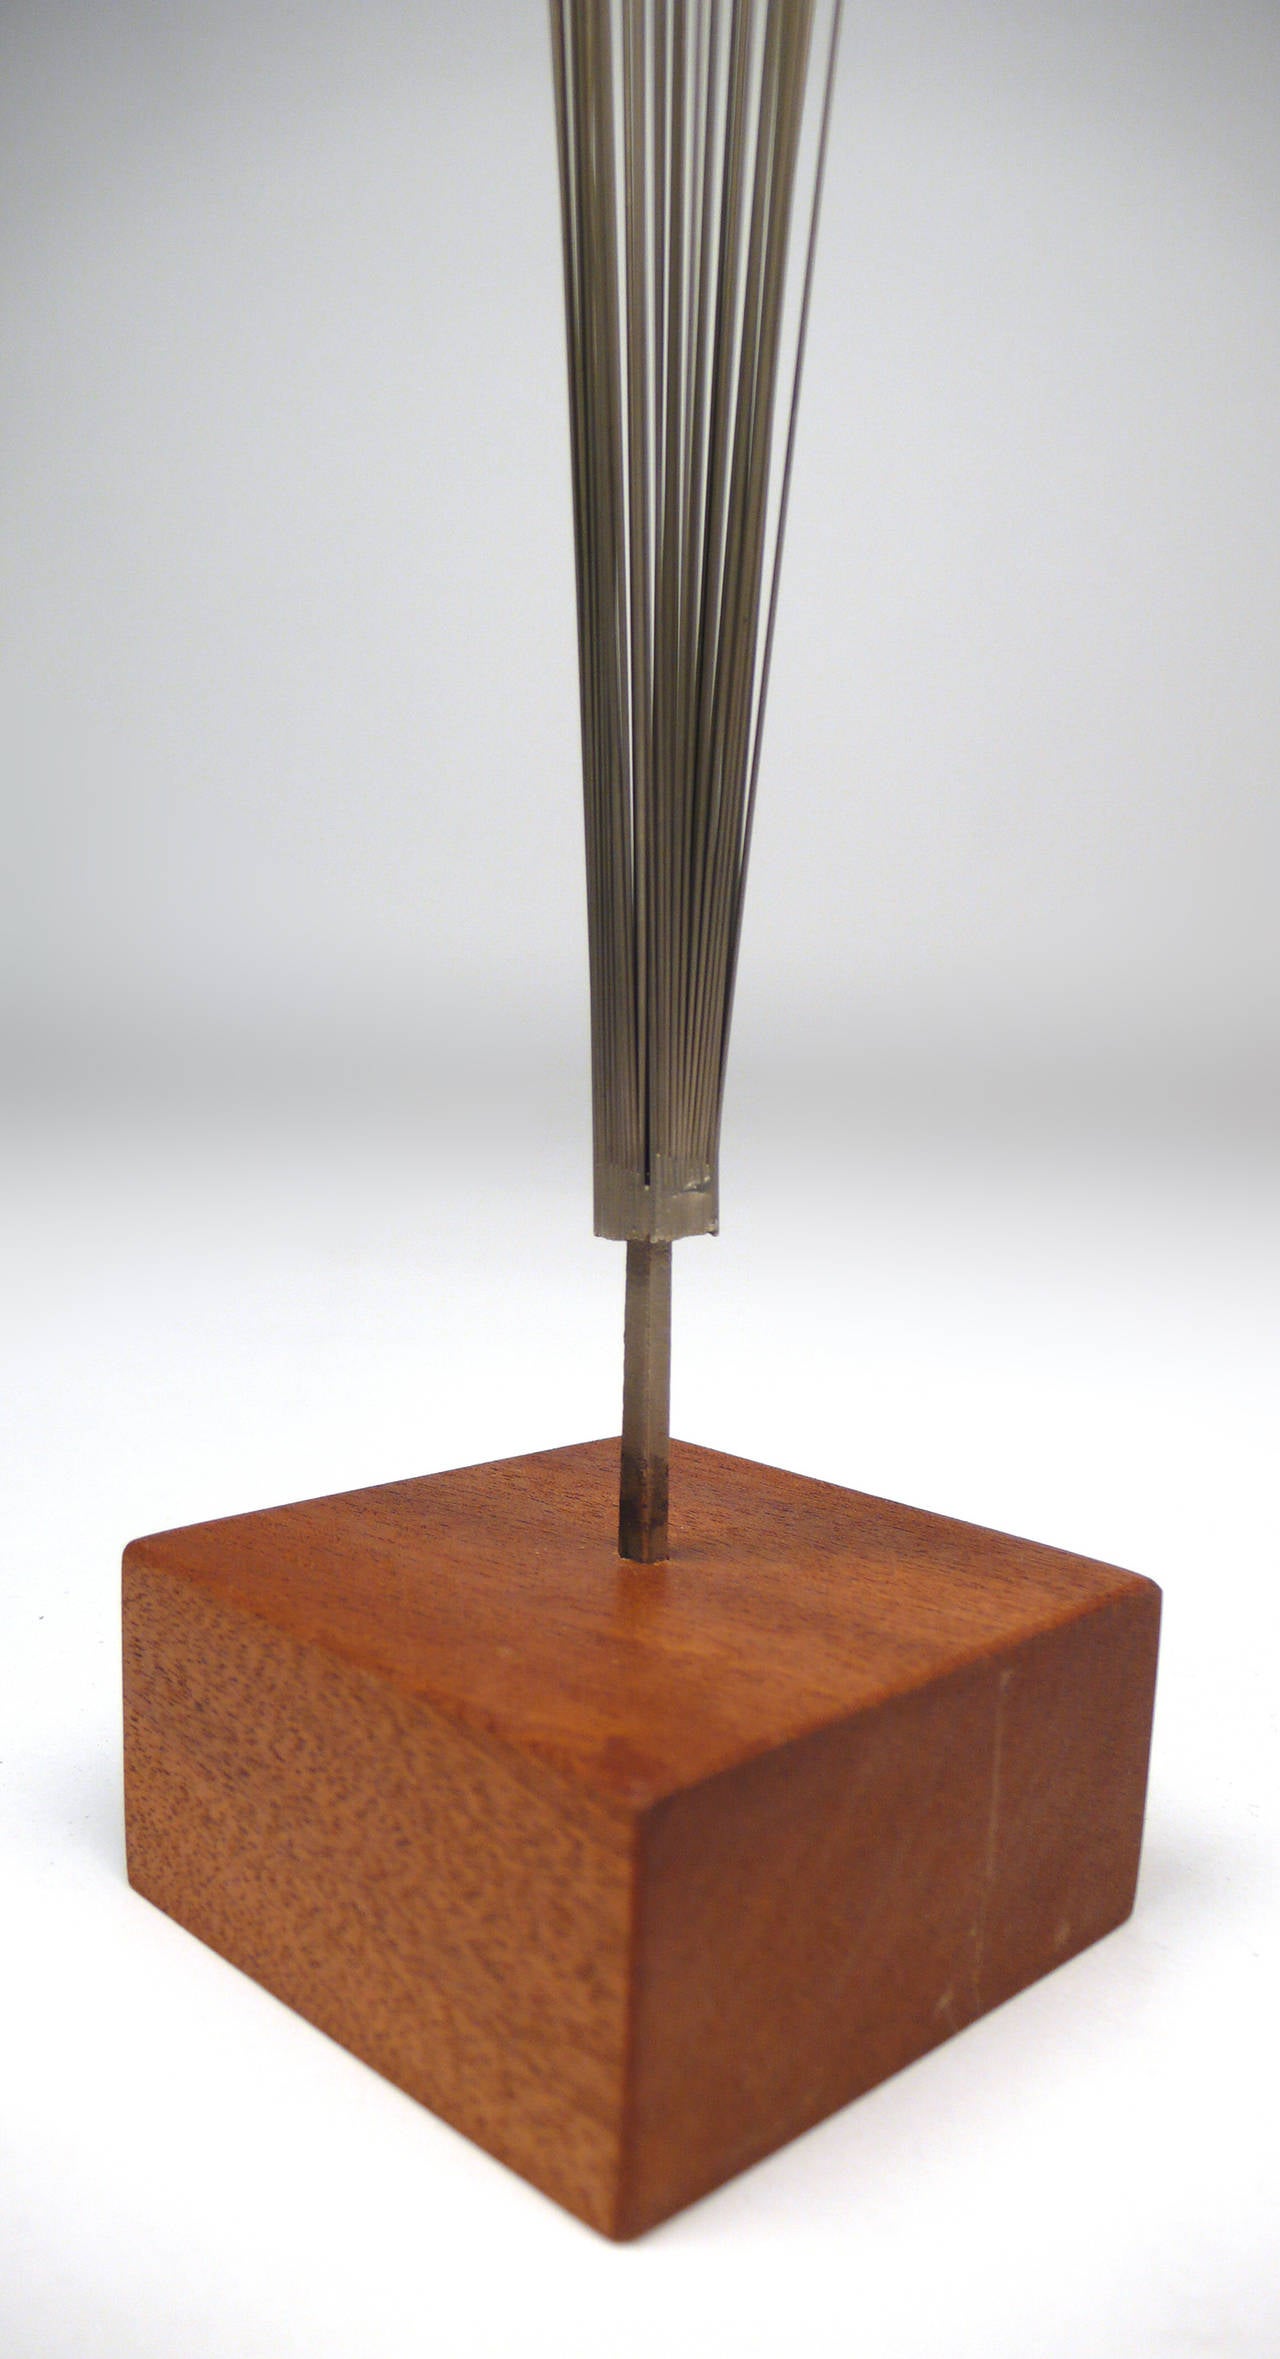 American Harry Bertoia's Experimental Conical Wire Form